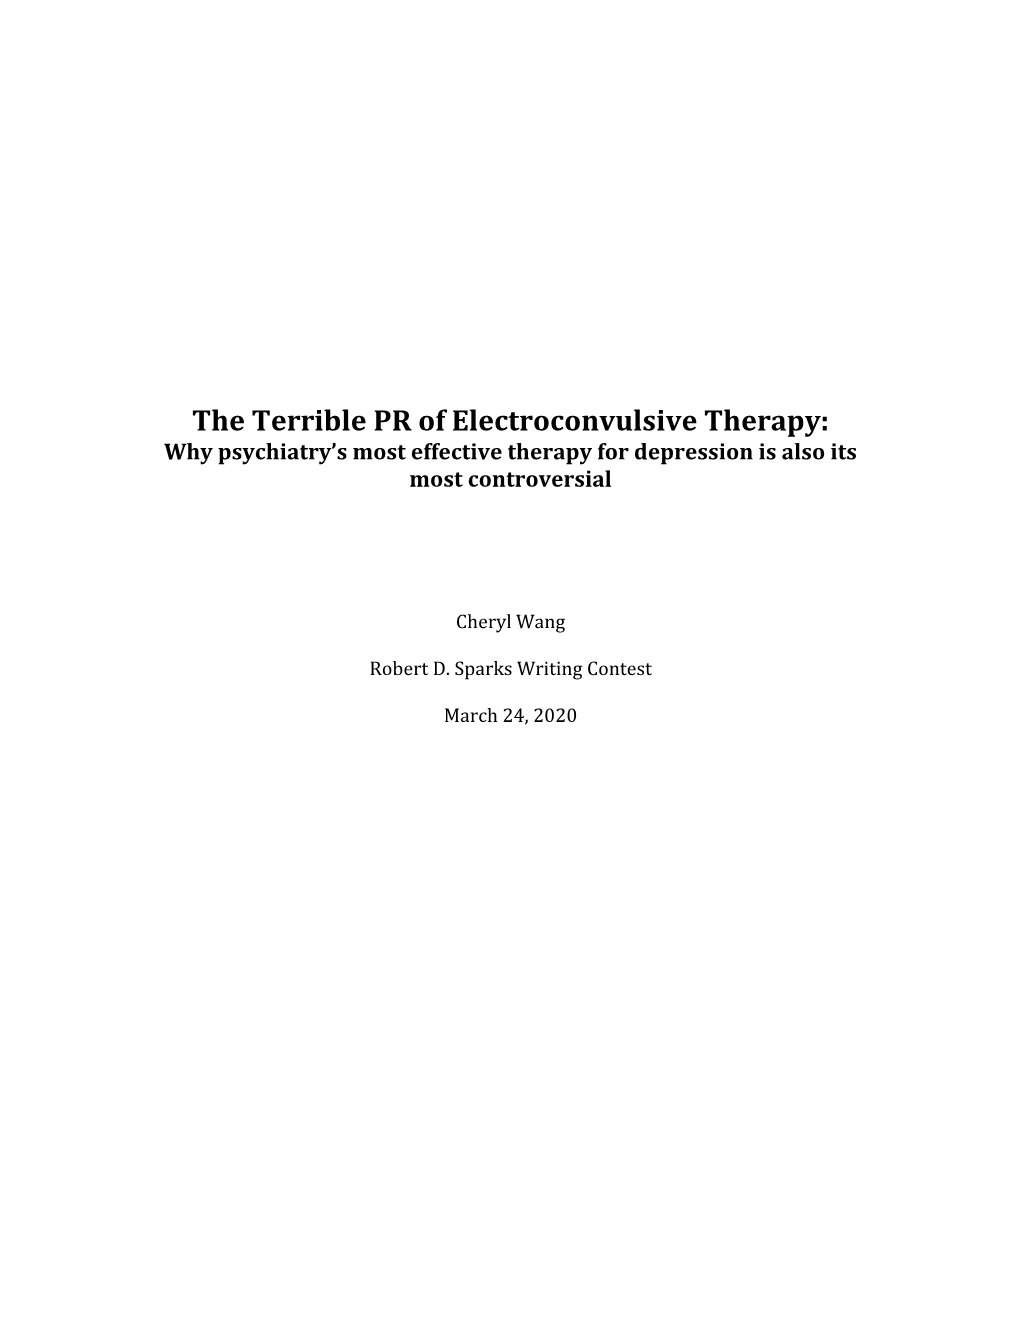 The Terrible PR of Electroconvulsive Therapy: Why Psychiatry’S Most Effective Therapy for Depression Is Also Its Most Controversial